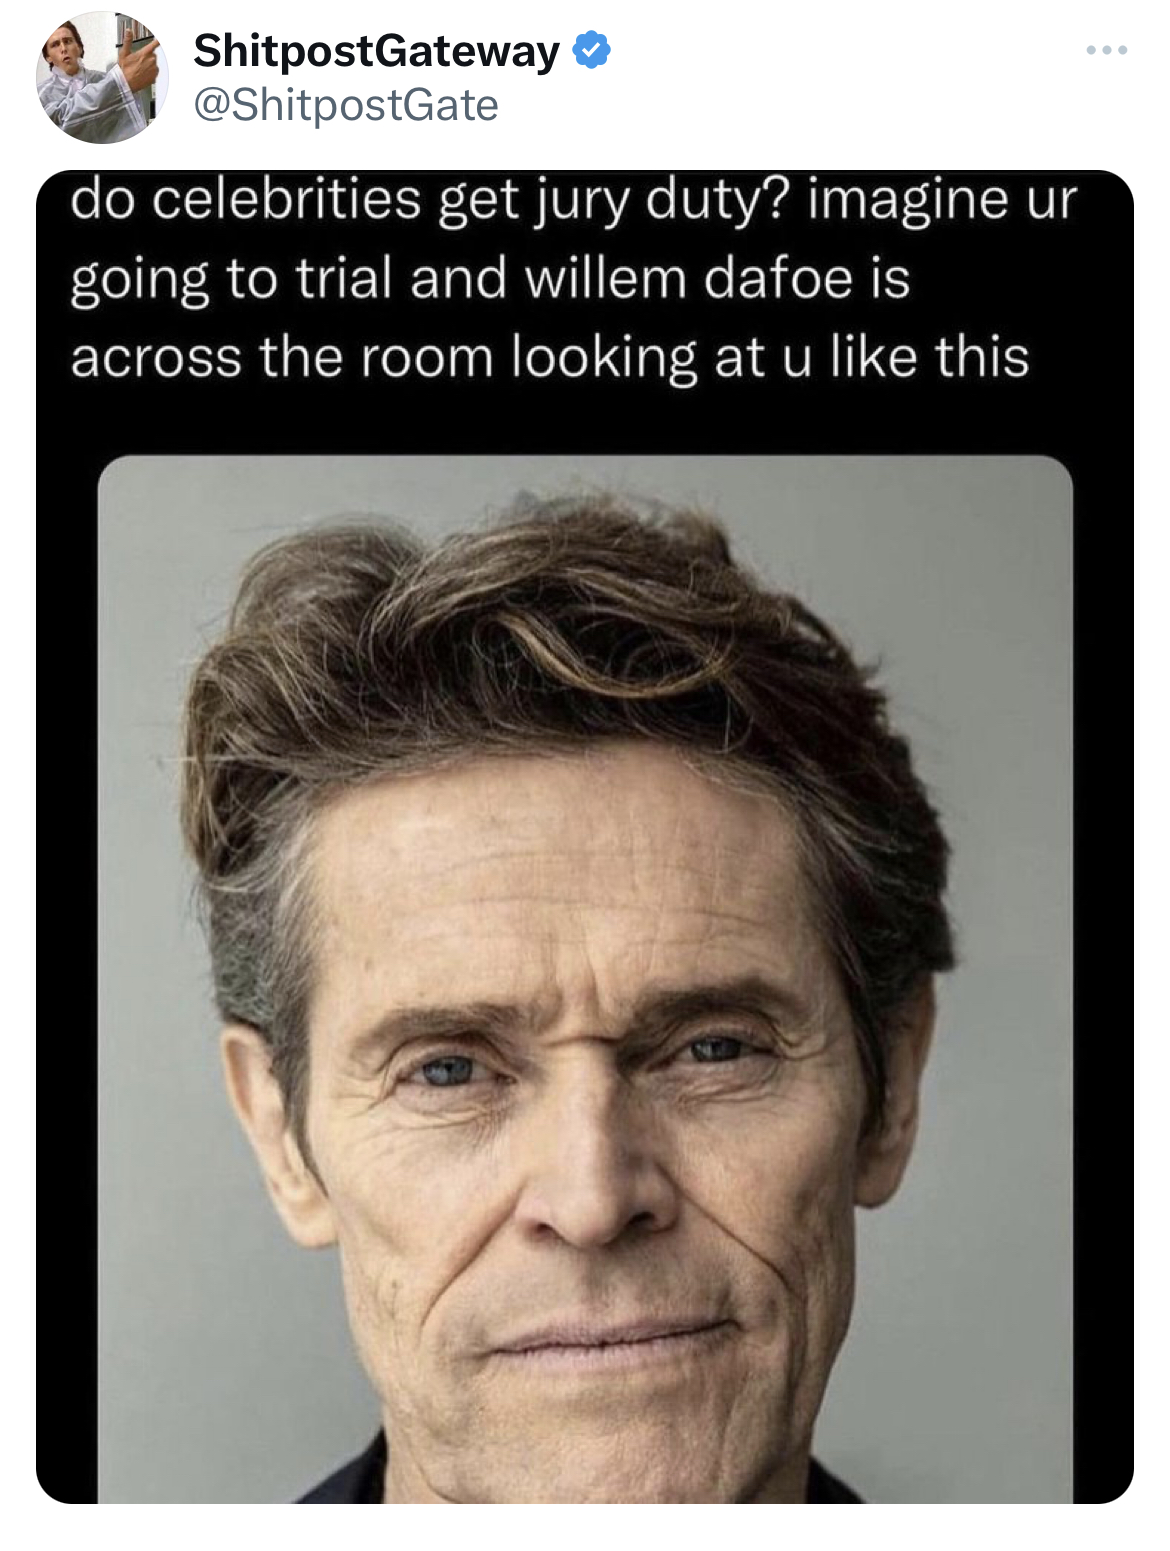 savage tweets - wontyouarent dafriend - ShitpostGateway do celebrities get jury duty? imagine ur going to trial and willem dafoe is across the room looking at u this